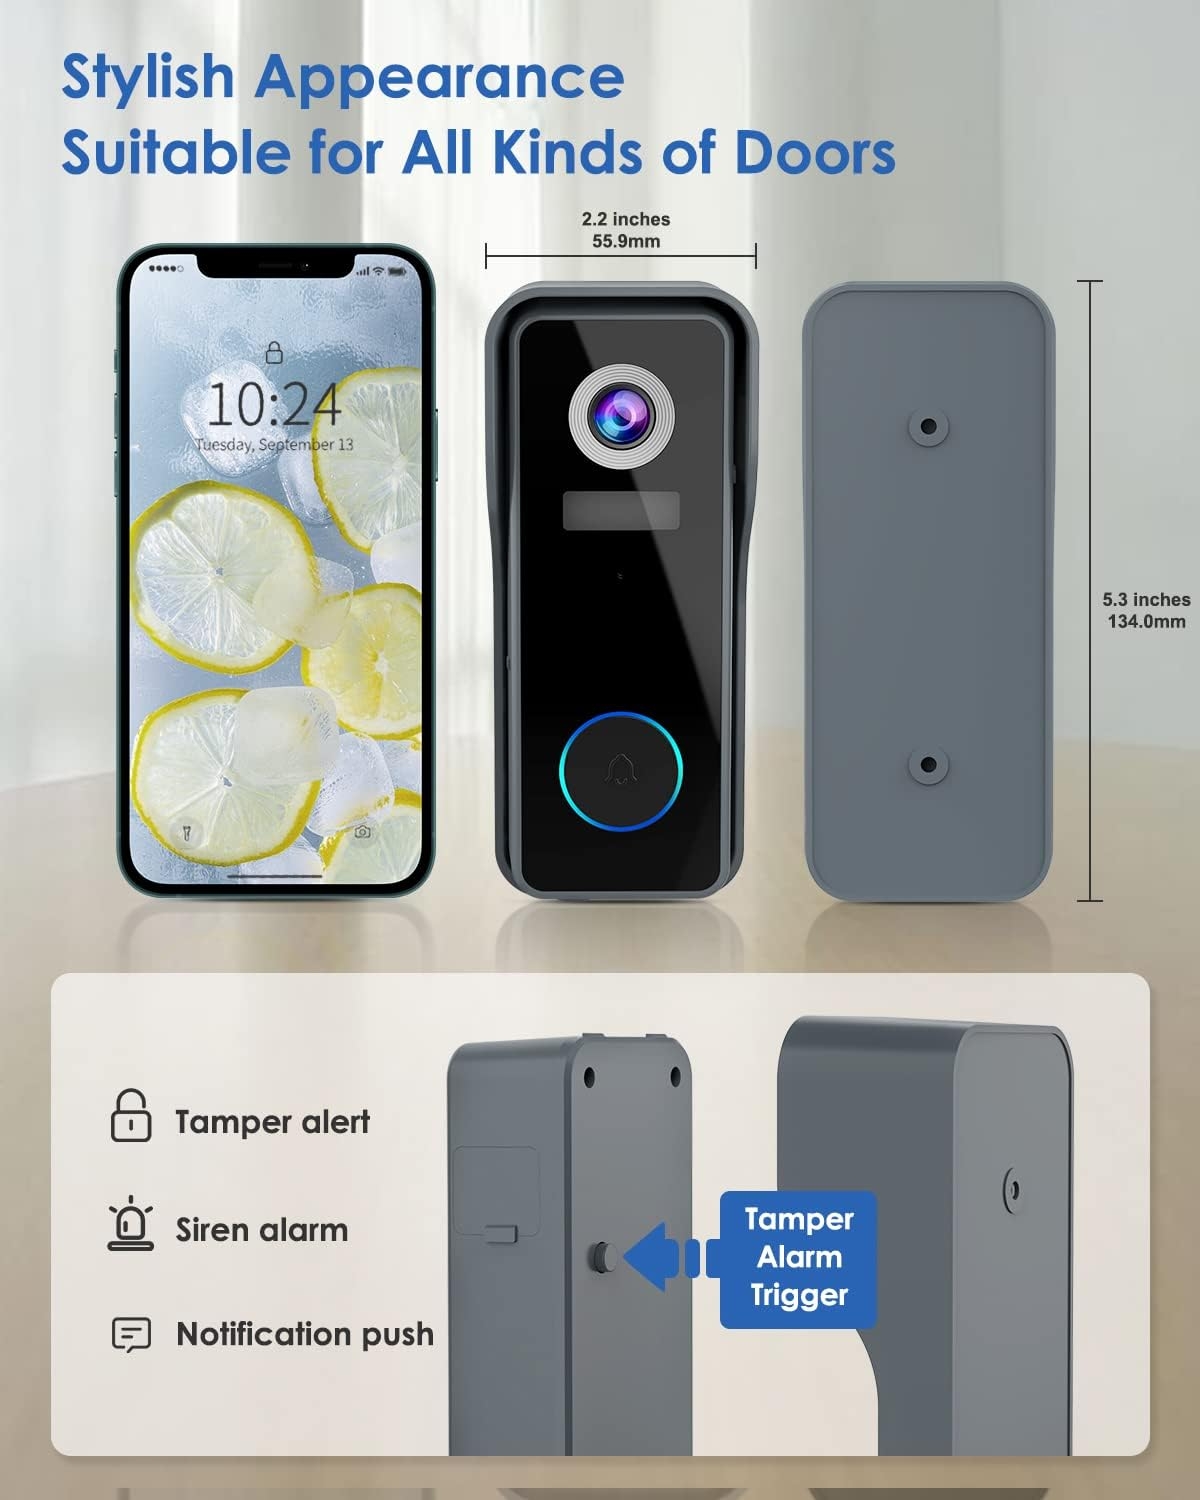 【2021 Upgraded】 ZUMIMALL WiFi Video Doorbell Camera, Wireless Camera Doorbell with Chime, 1080P HD, Motion Detection, Night Vision, 2-Way Audio, Cloud Storage(Optional), 32 GB SD Card Included